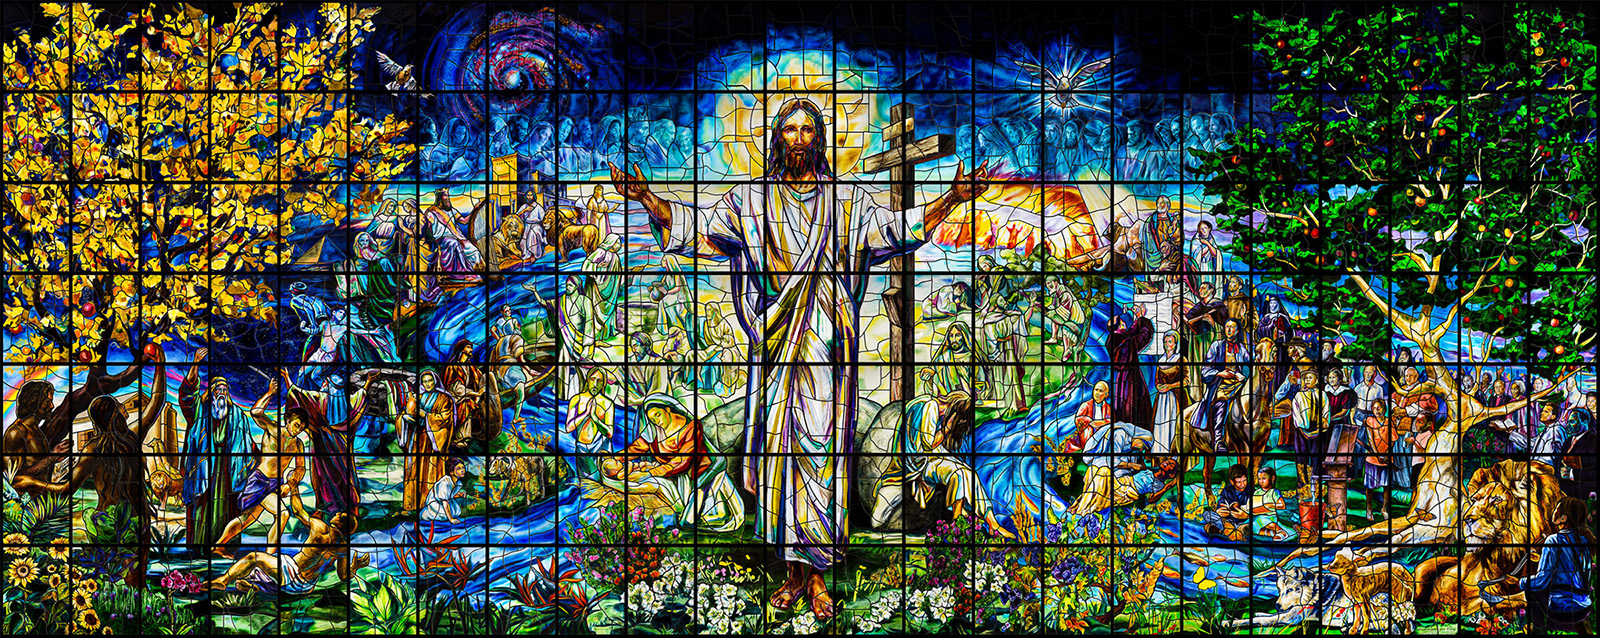 The full stained-glass window at the United Methodist Church of the Resurrection in Leawood, Kansas. (Photo courtesy Judson Studios)